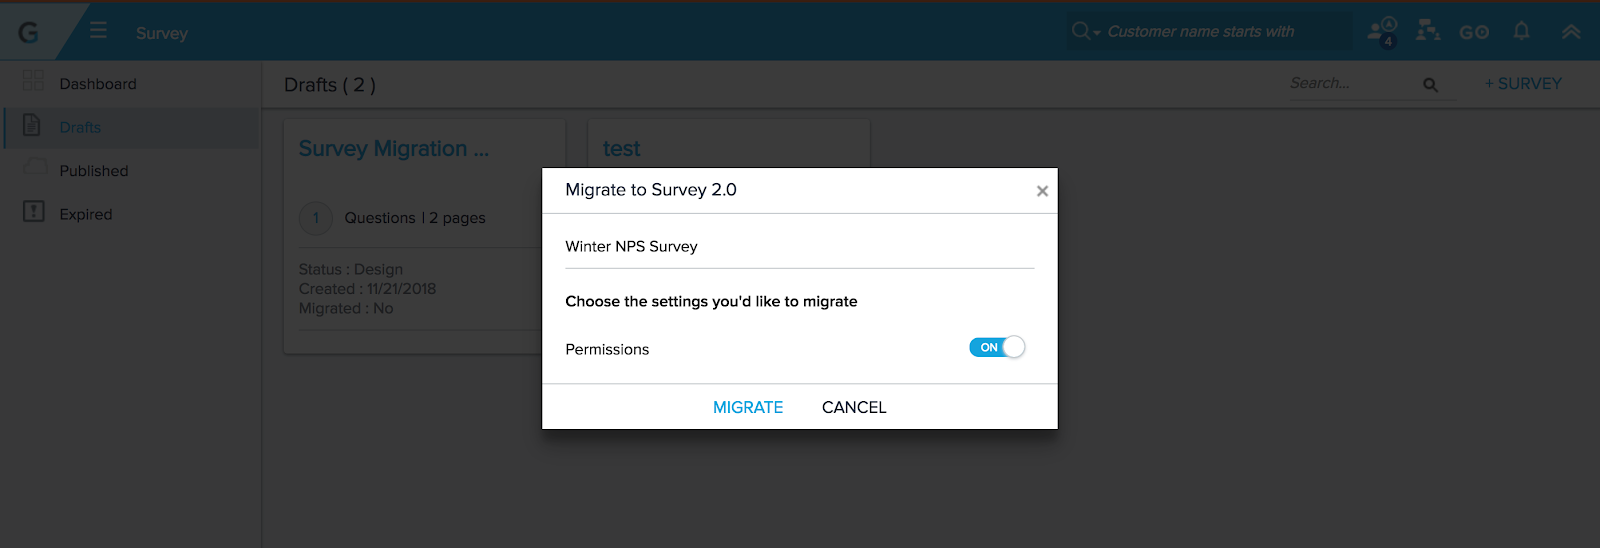 4 Migrating Surveys from 1.0 to 2.0.png